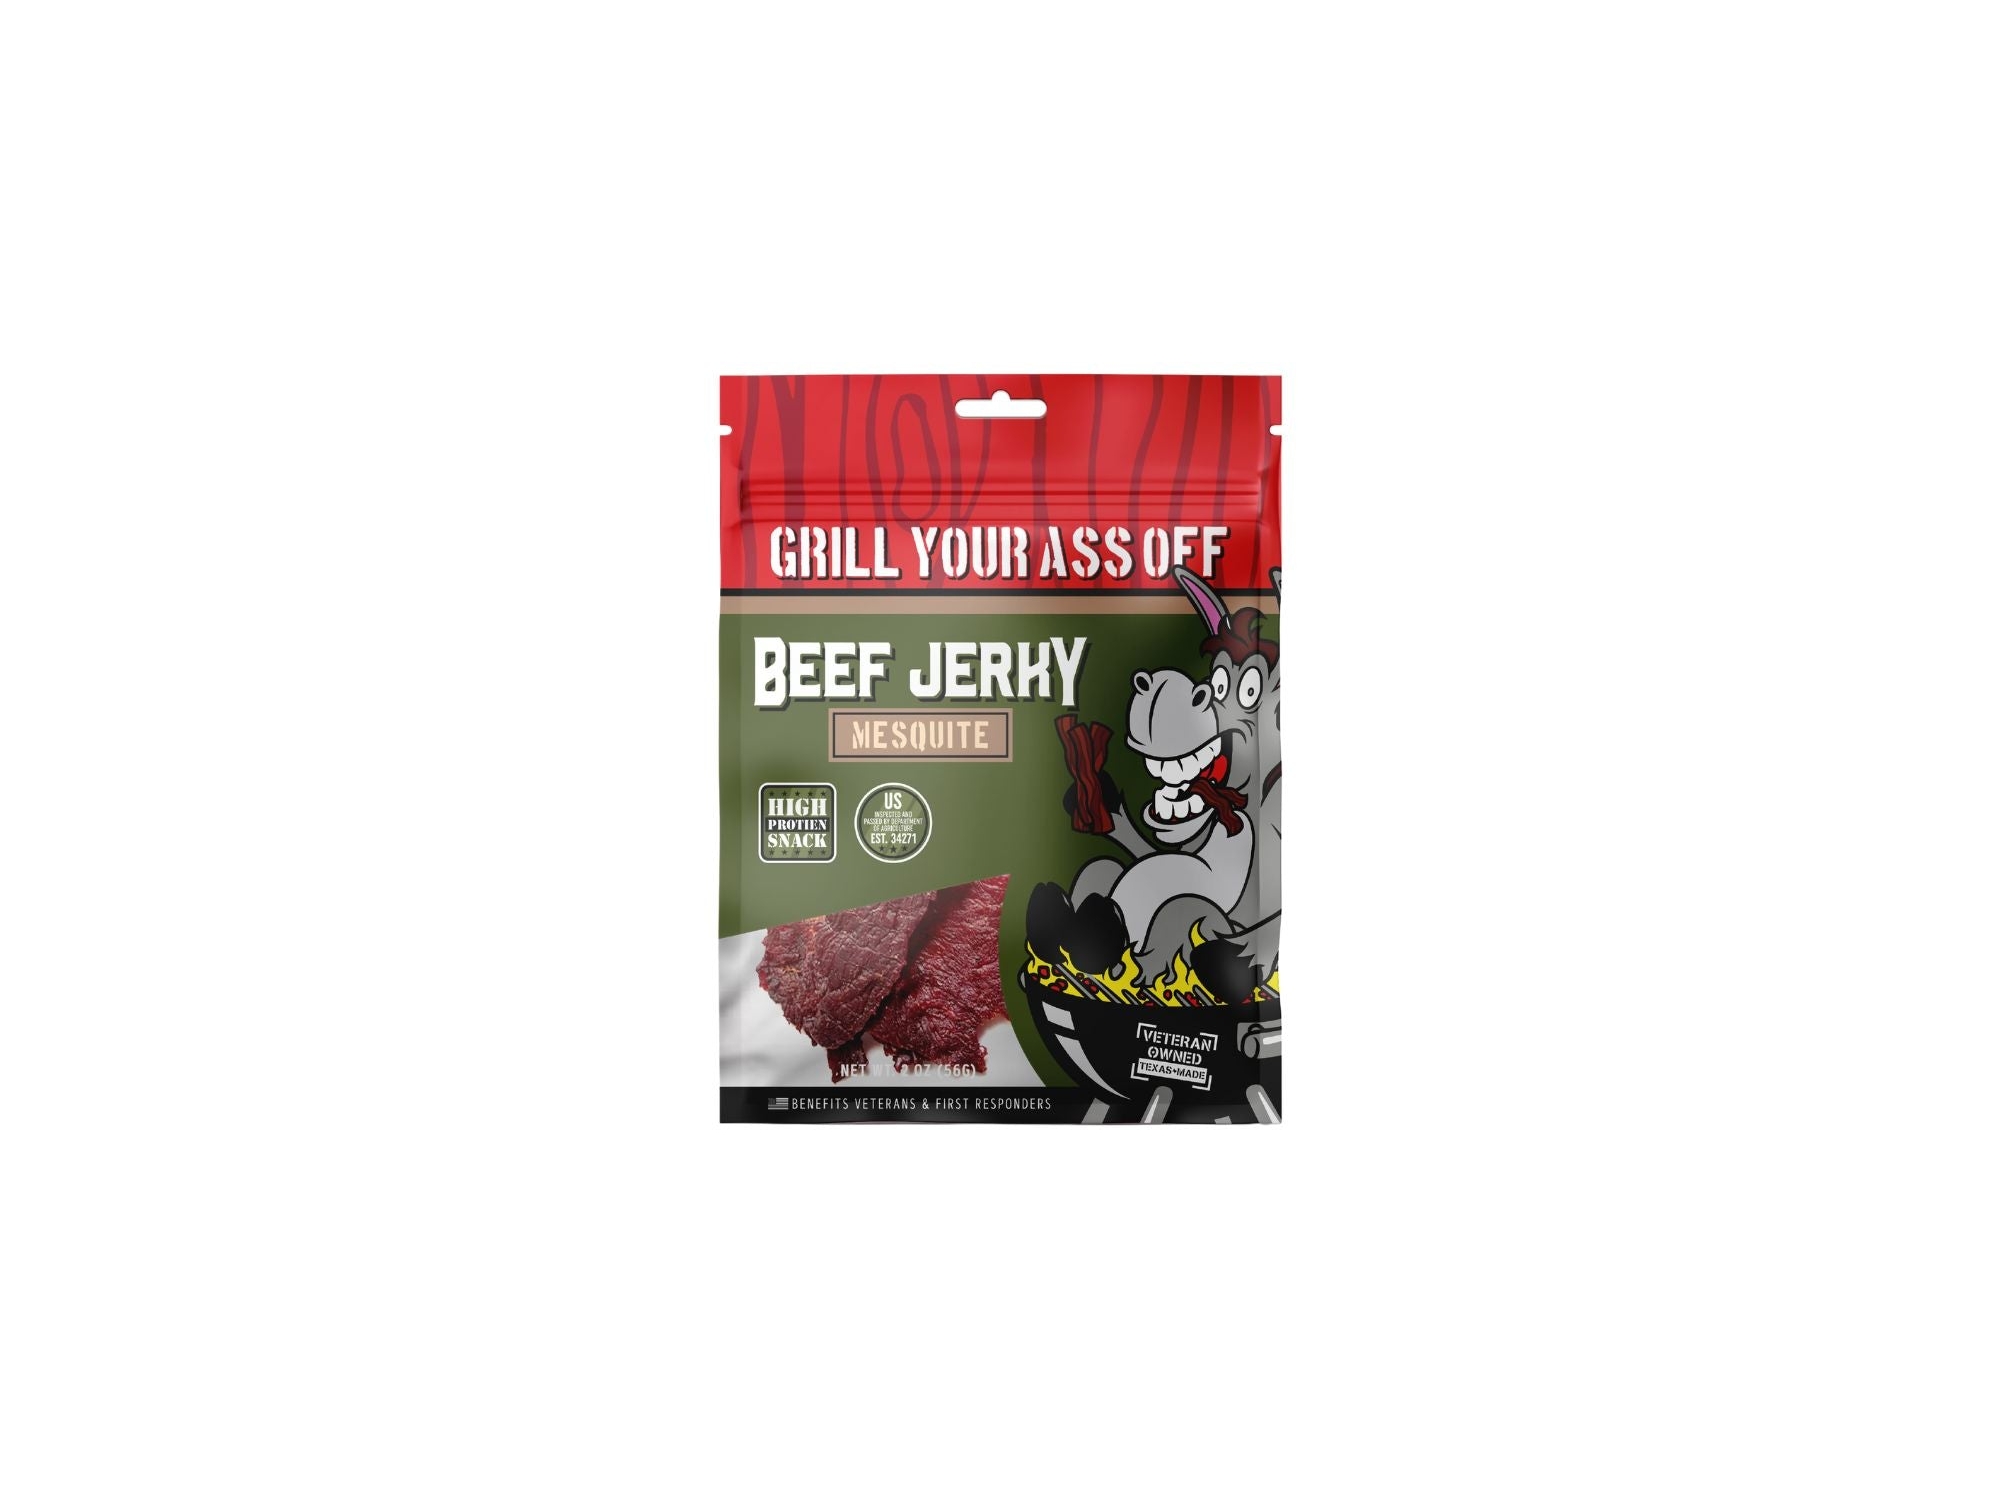 Grill Your Ass Off Mesquite Beef Jerky